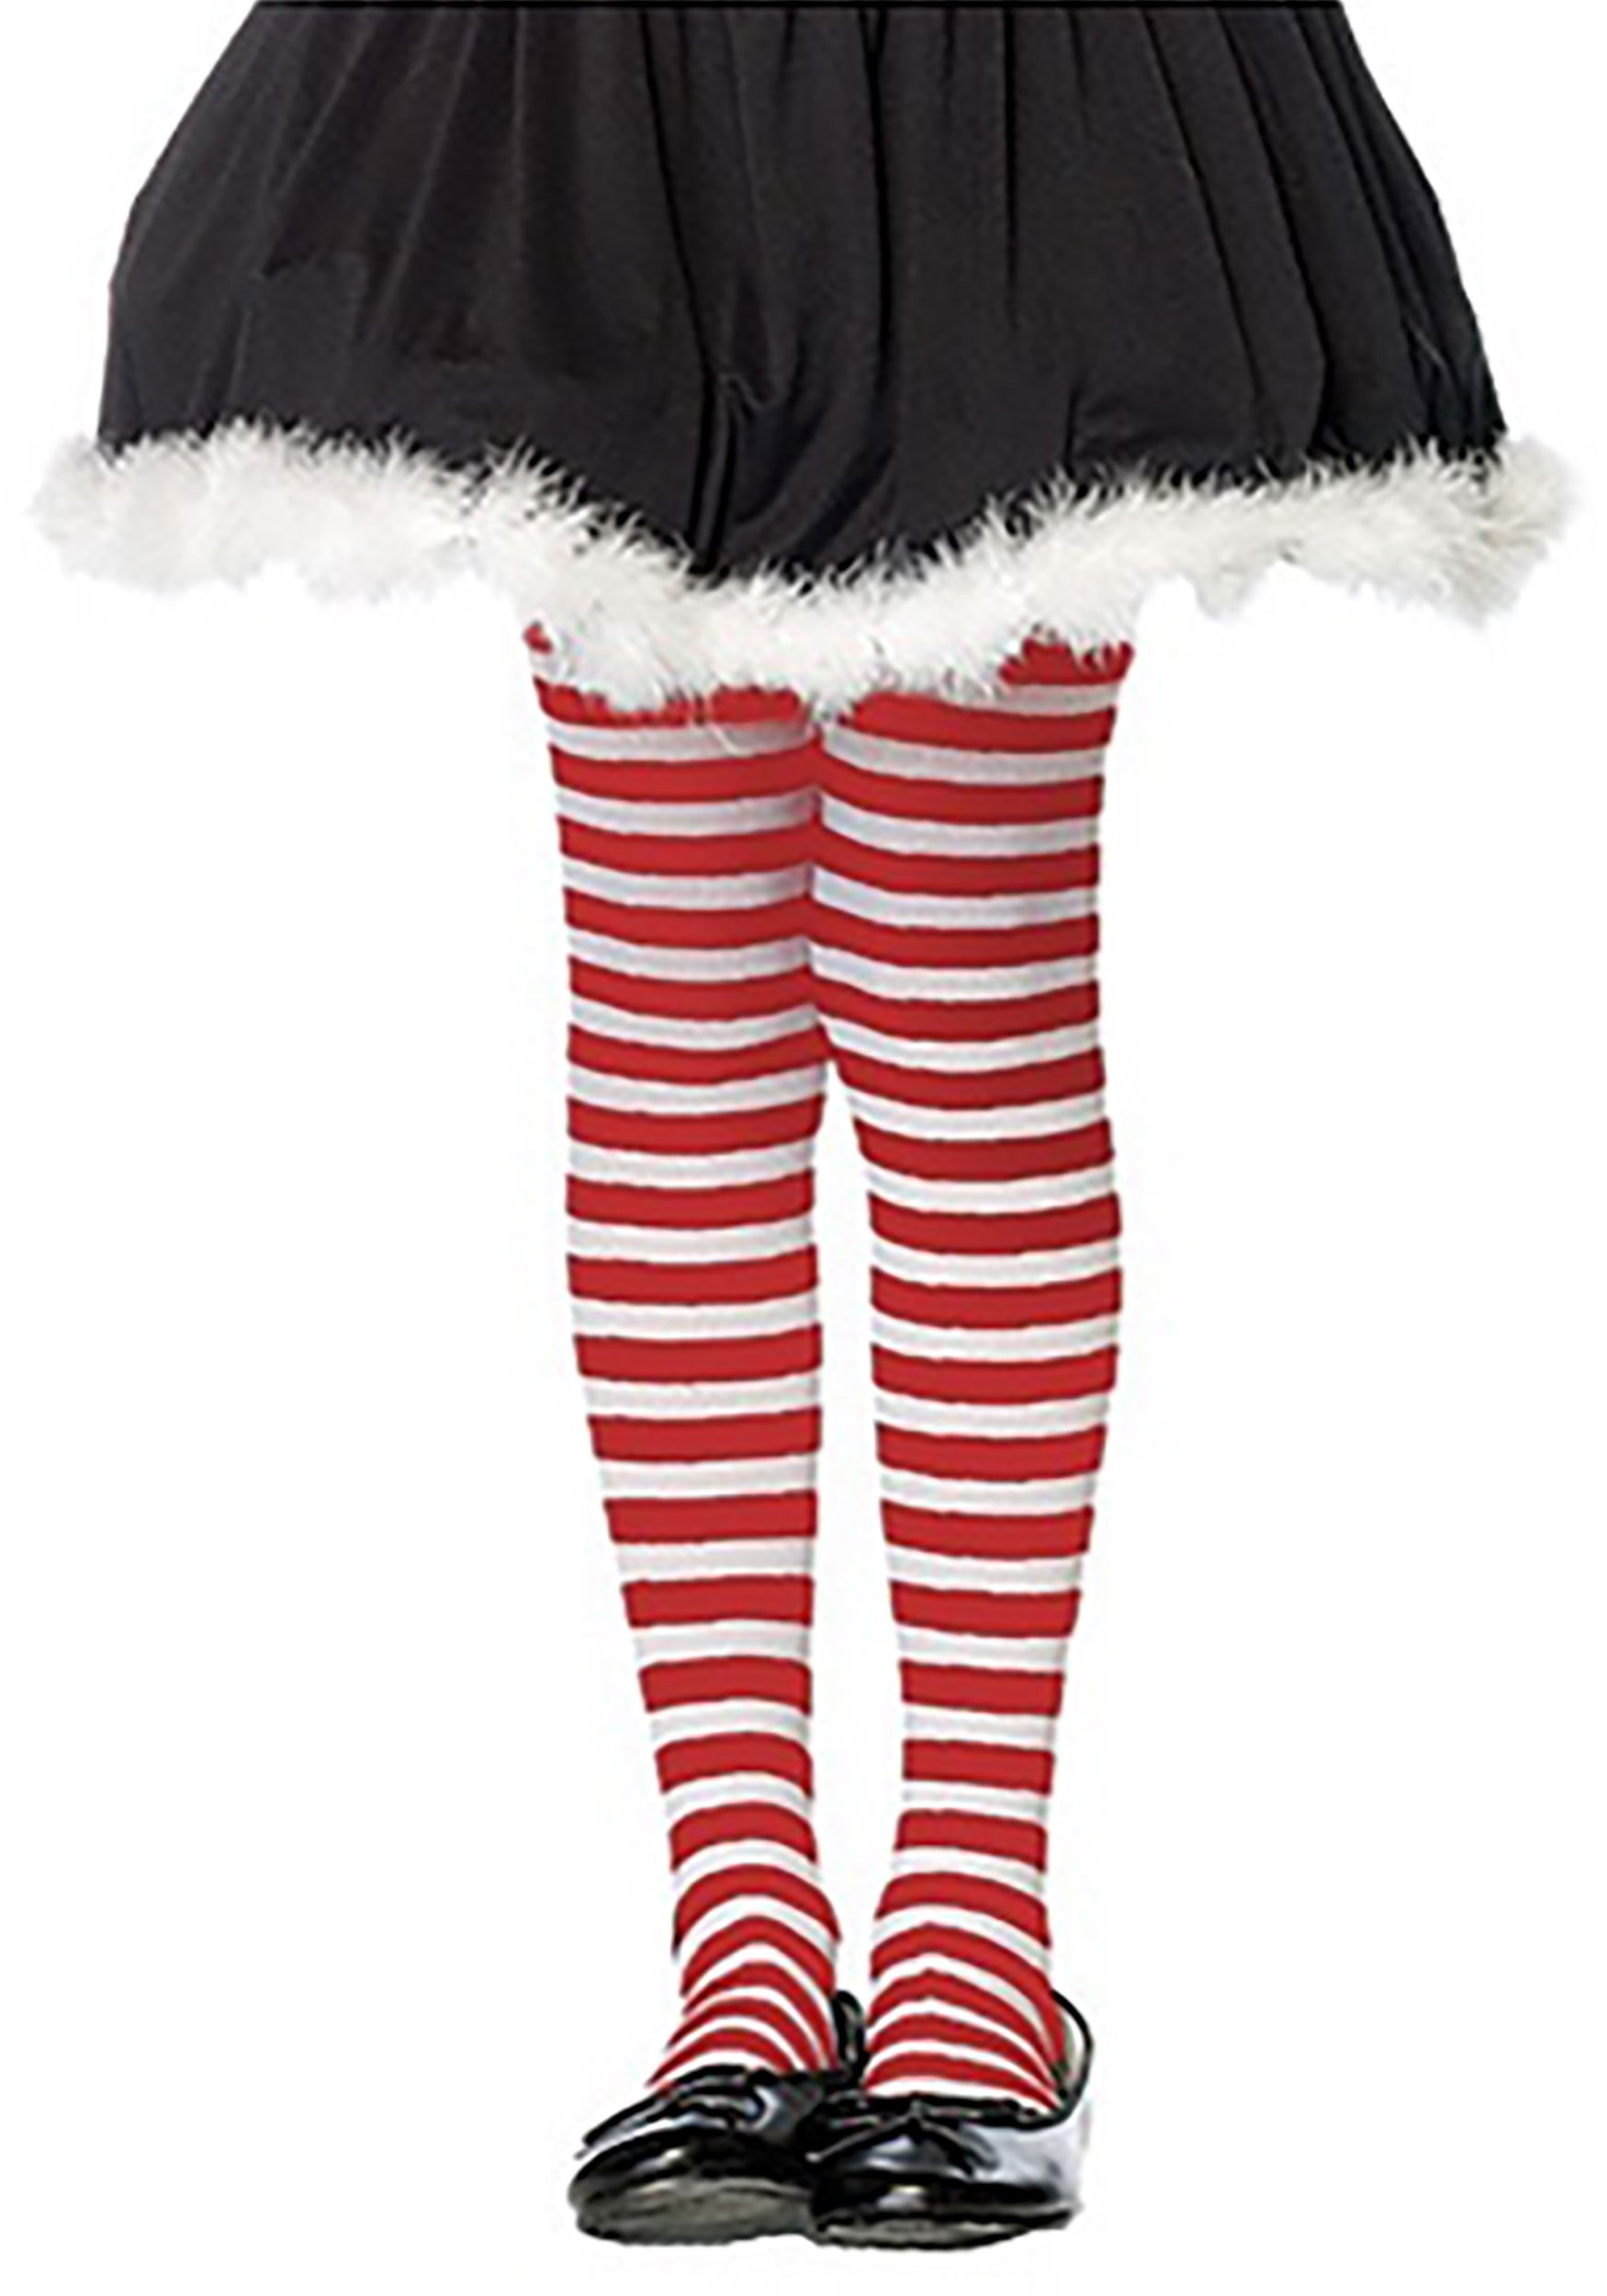 Kid’s Red and White Striped Tights